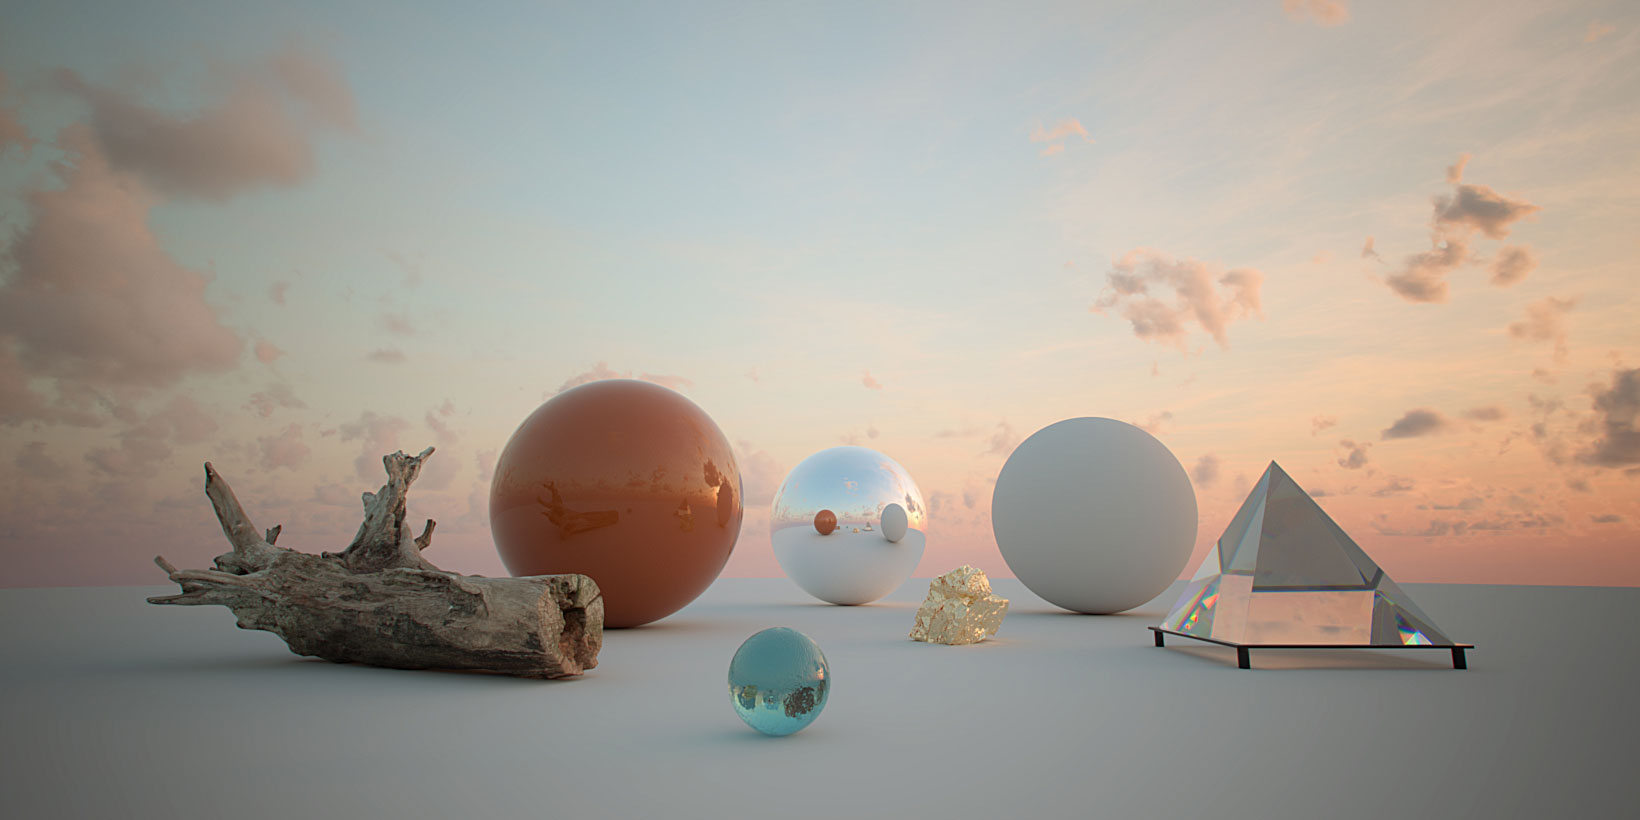 CG HDRI / Winter Collection Skies 02 from helloluxx